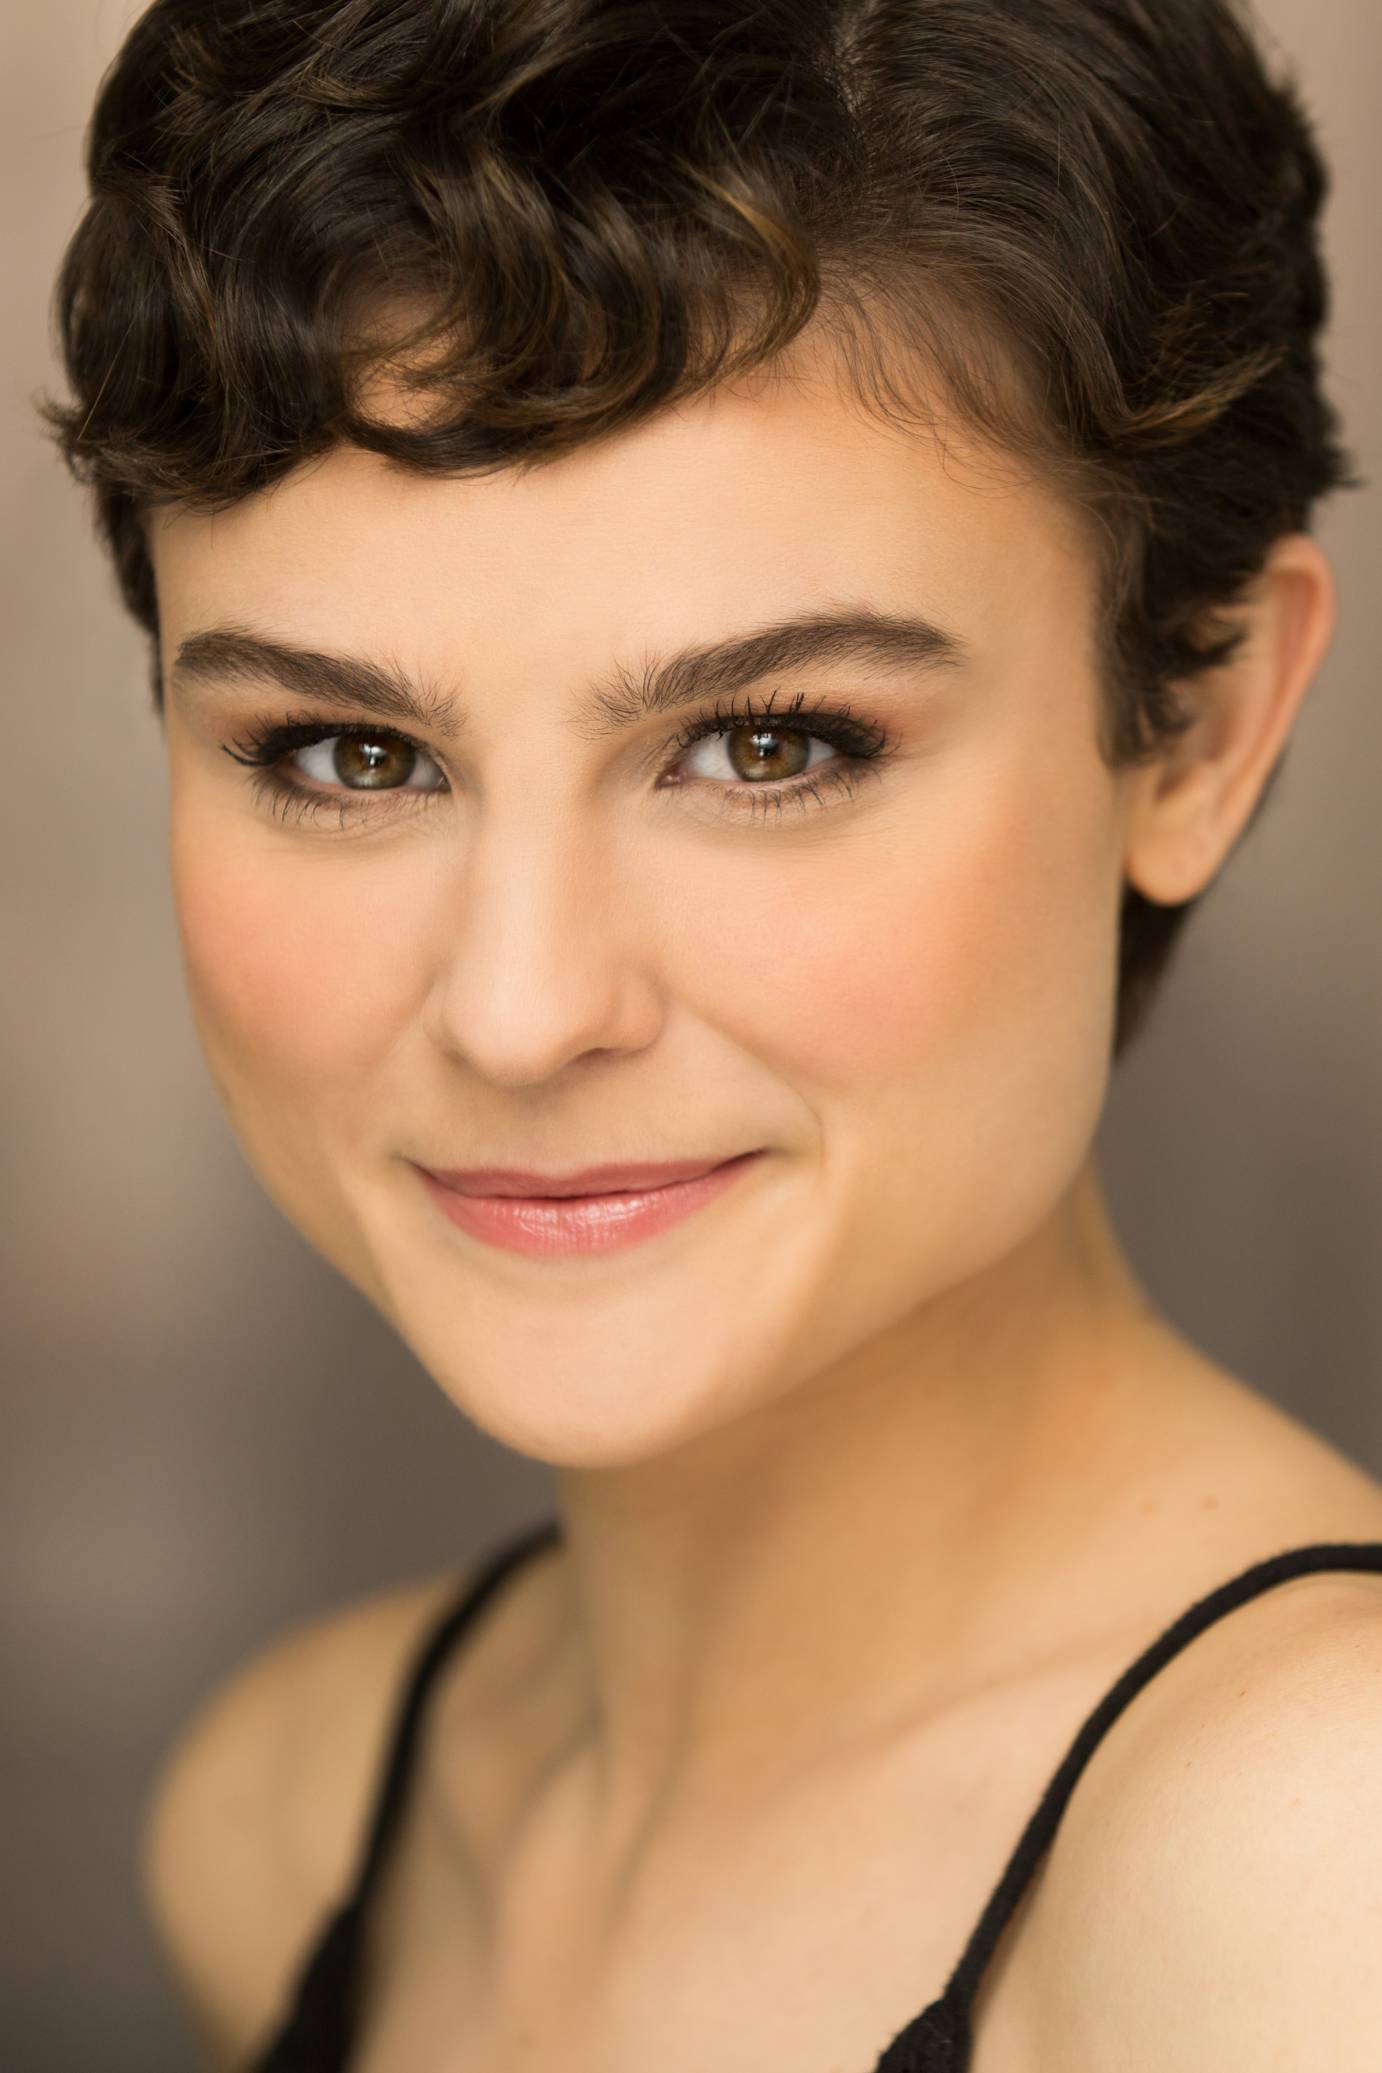 A headshot of Melanie Moore features a woman with a brown pixie cut, brown eyes, and a pink-lipped smile.